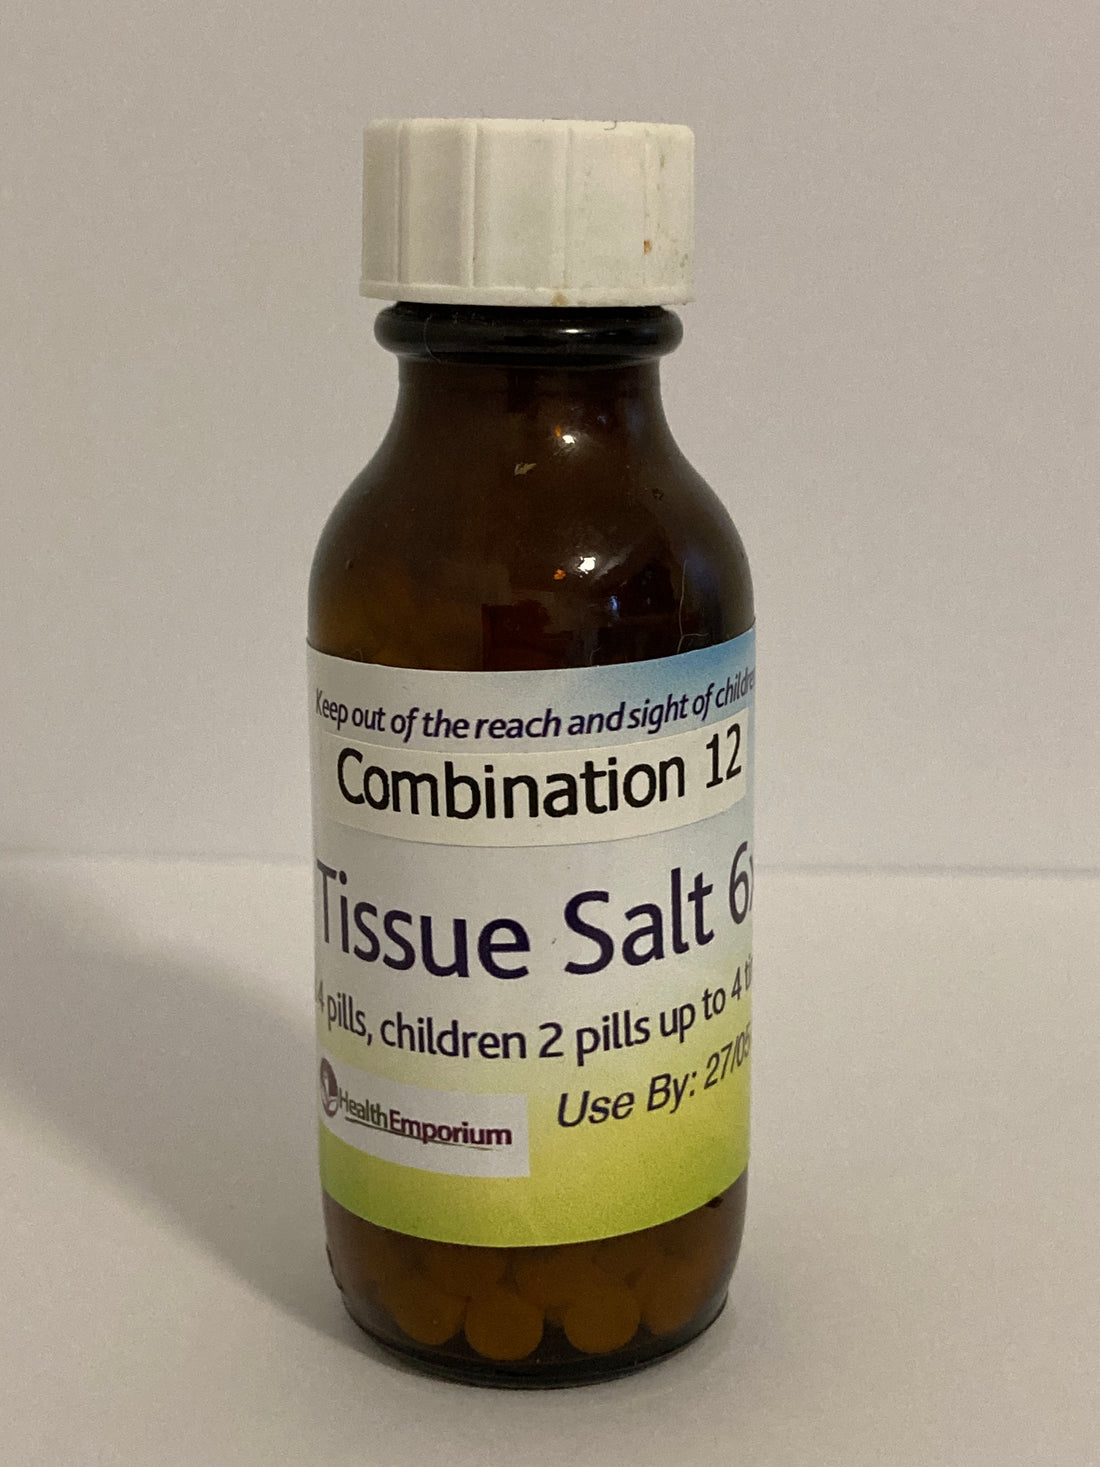 Combination of All 12 Tissue Salts